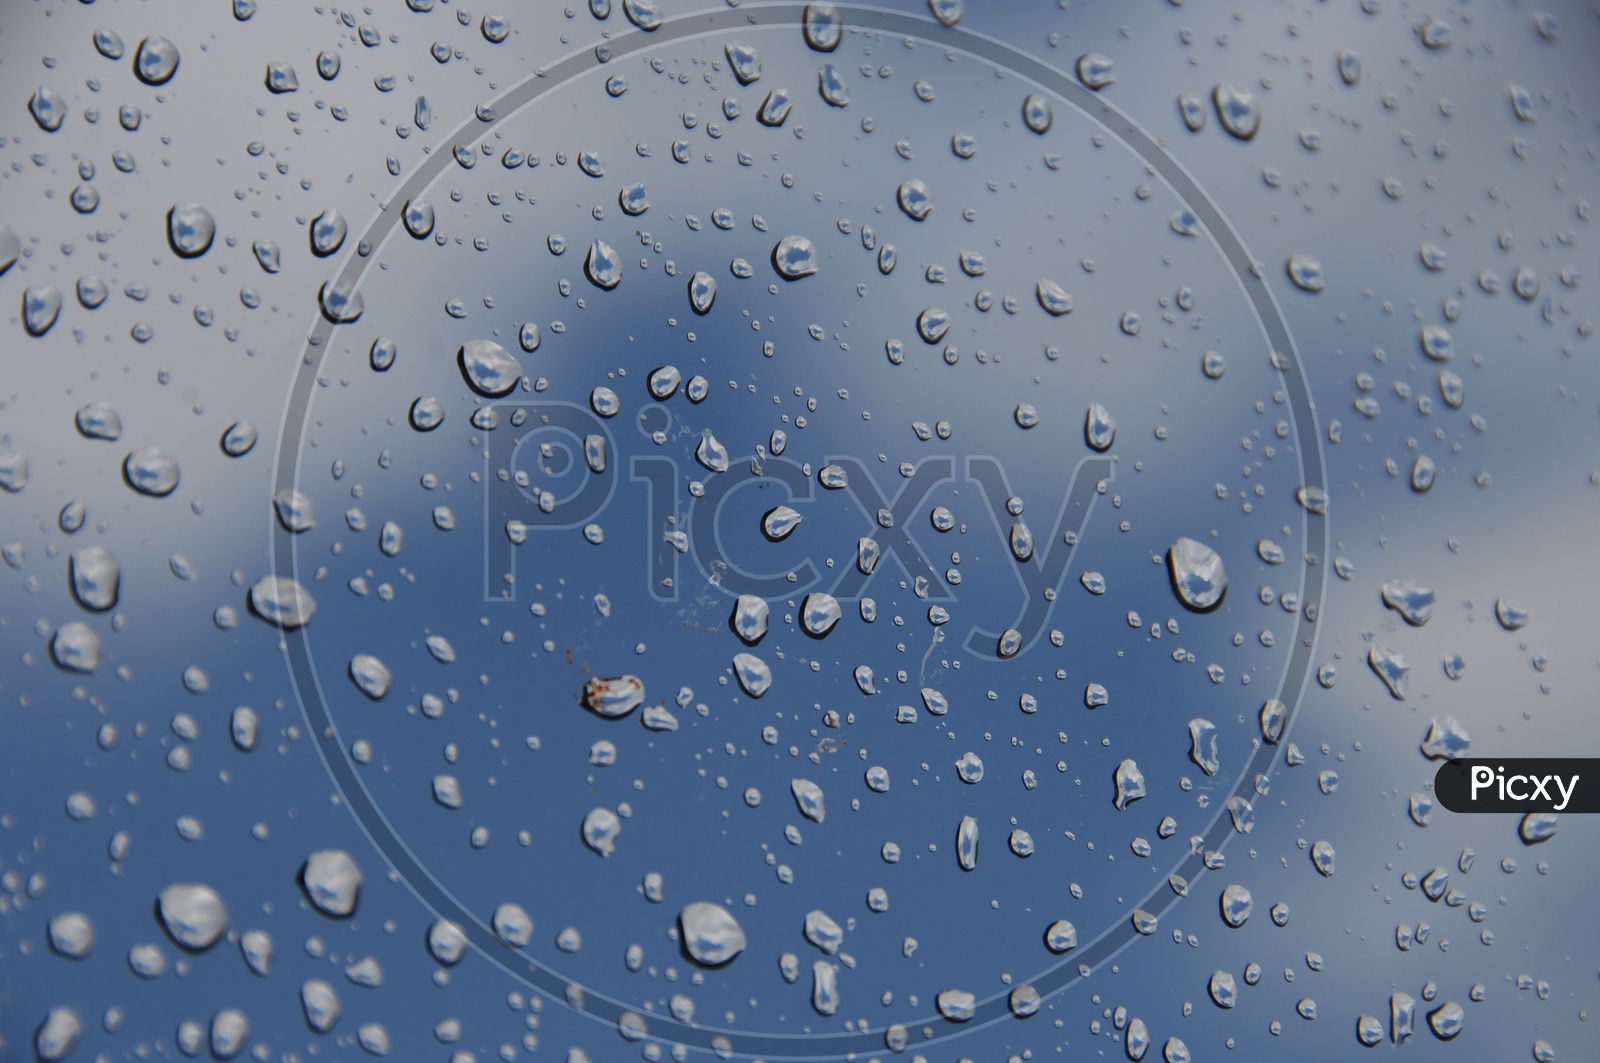 Drops Of Water Bubbles PNG, Clipart, Abstract, Backgrounds, Blue